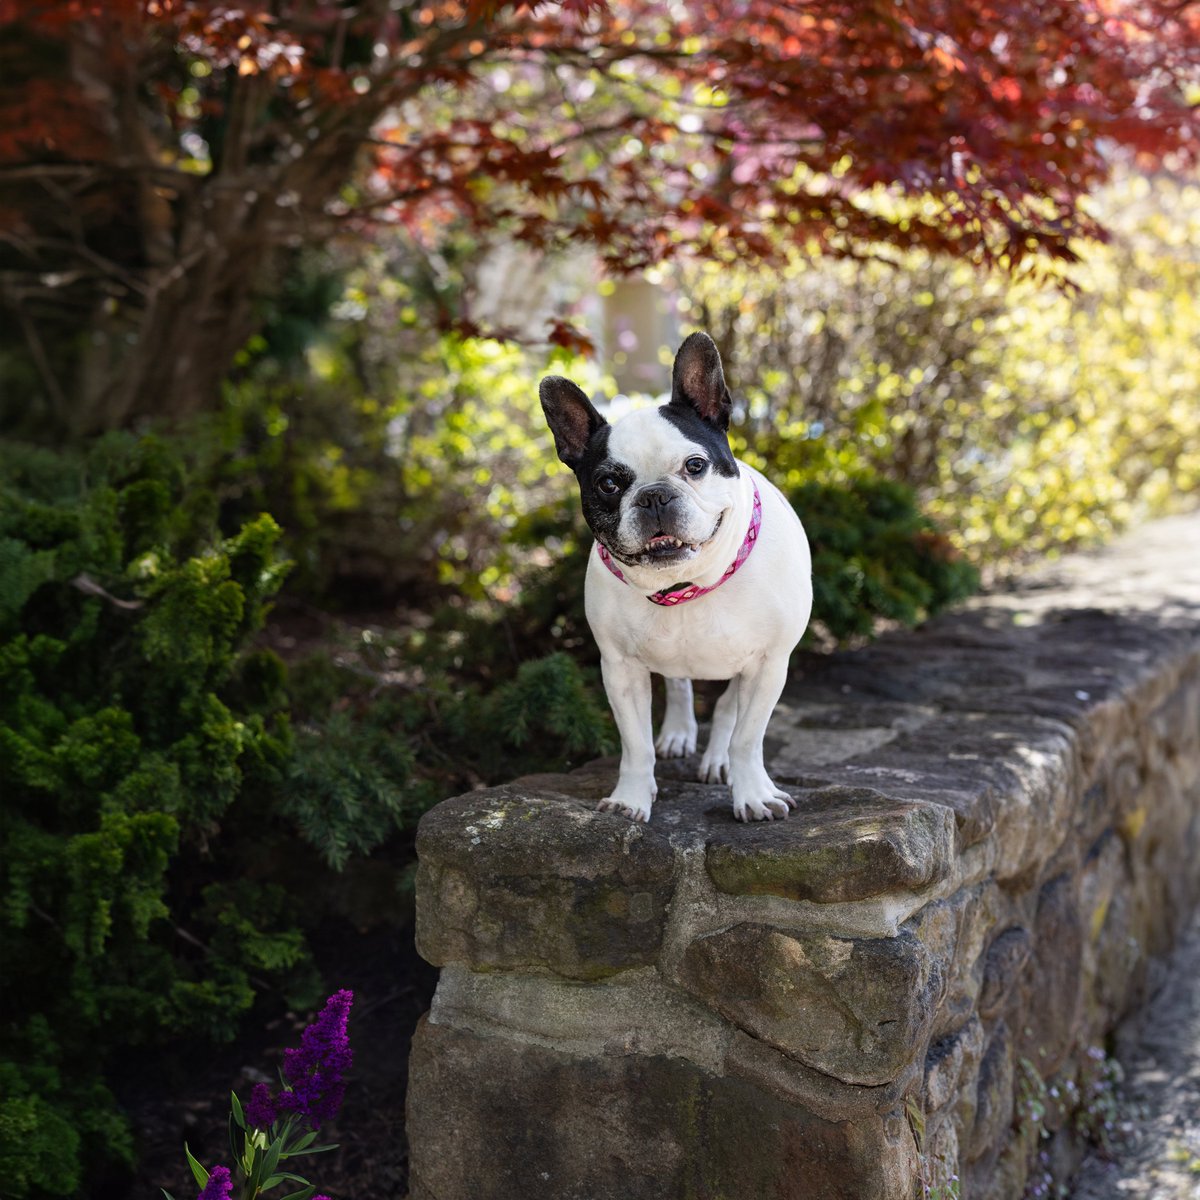 🐾🌆 Bonjour, mes amis! Look who's strutting through the streets of Doylestown, PA! This adorable French Bulldog, Stella, captured on her chic city adventure with full attention. With her amazing ears and charming personality, she's stealing hearts left and right!  #FrenchBulldog